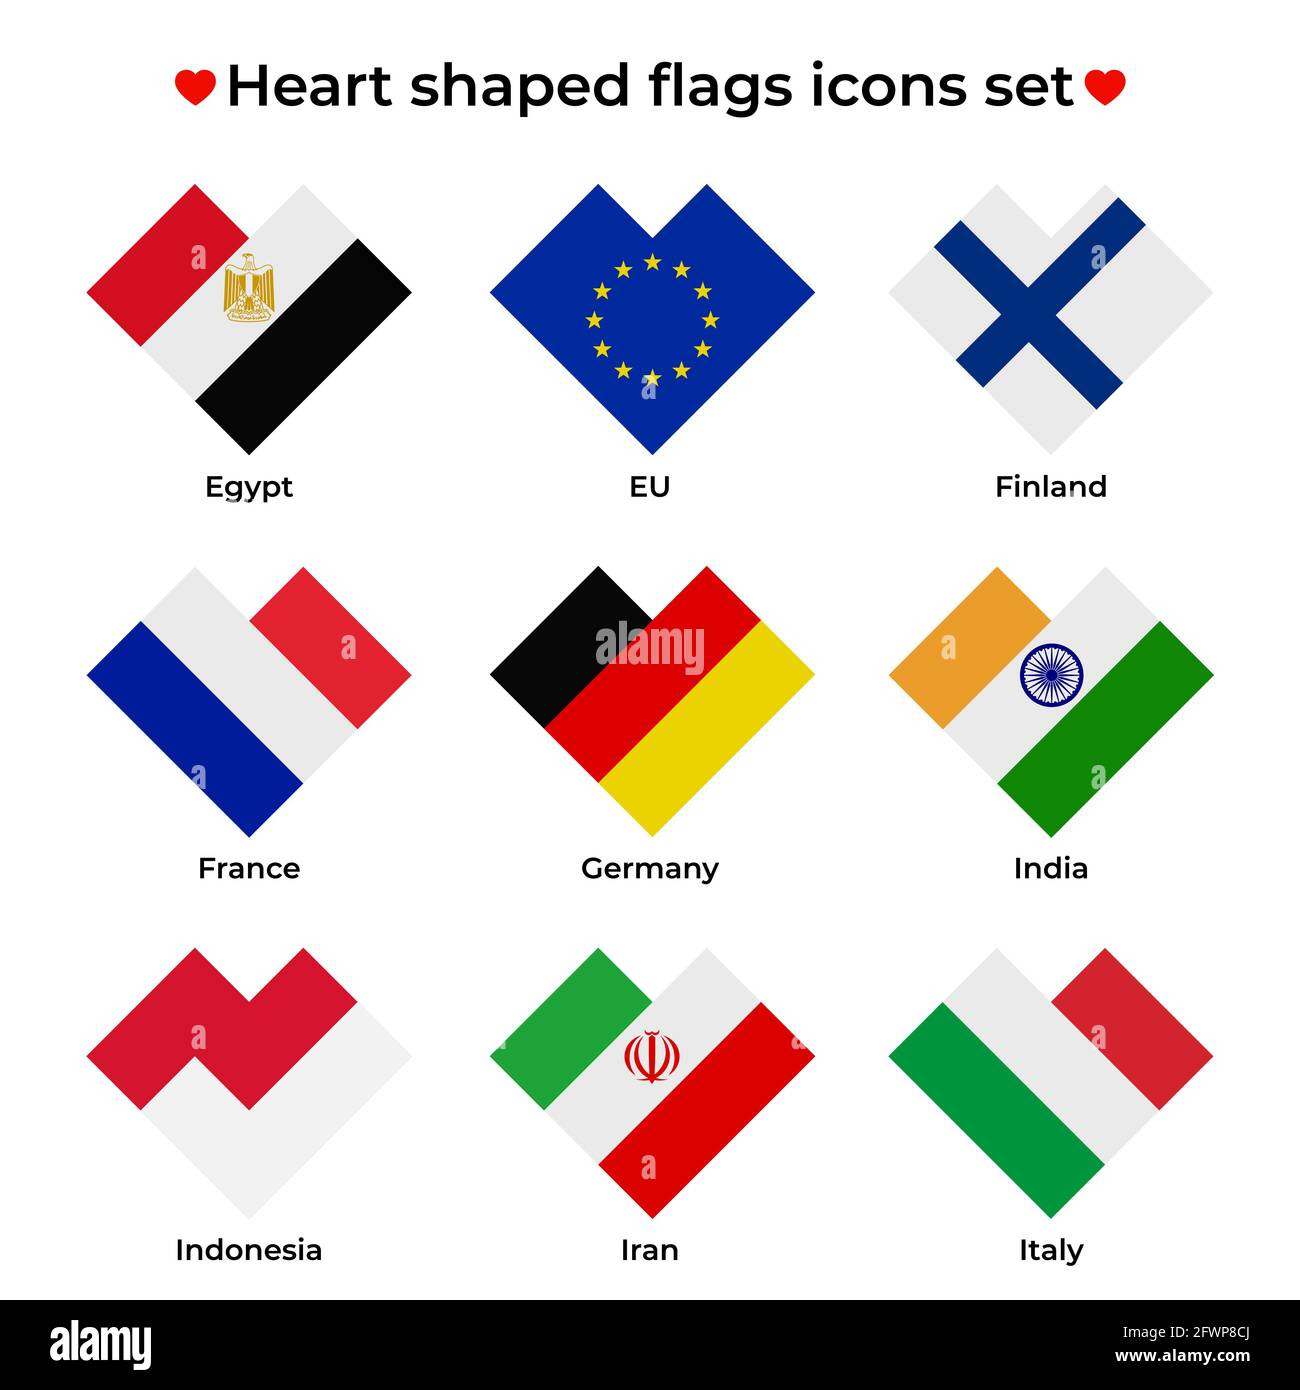 Heart shaped flags icons set. Flag icon in simple rectangular heart shape. Vector icon, symbol, button. Illustration in flat style Stock Vector